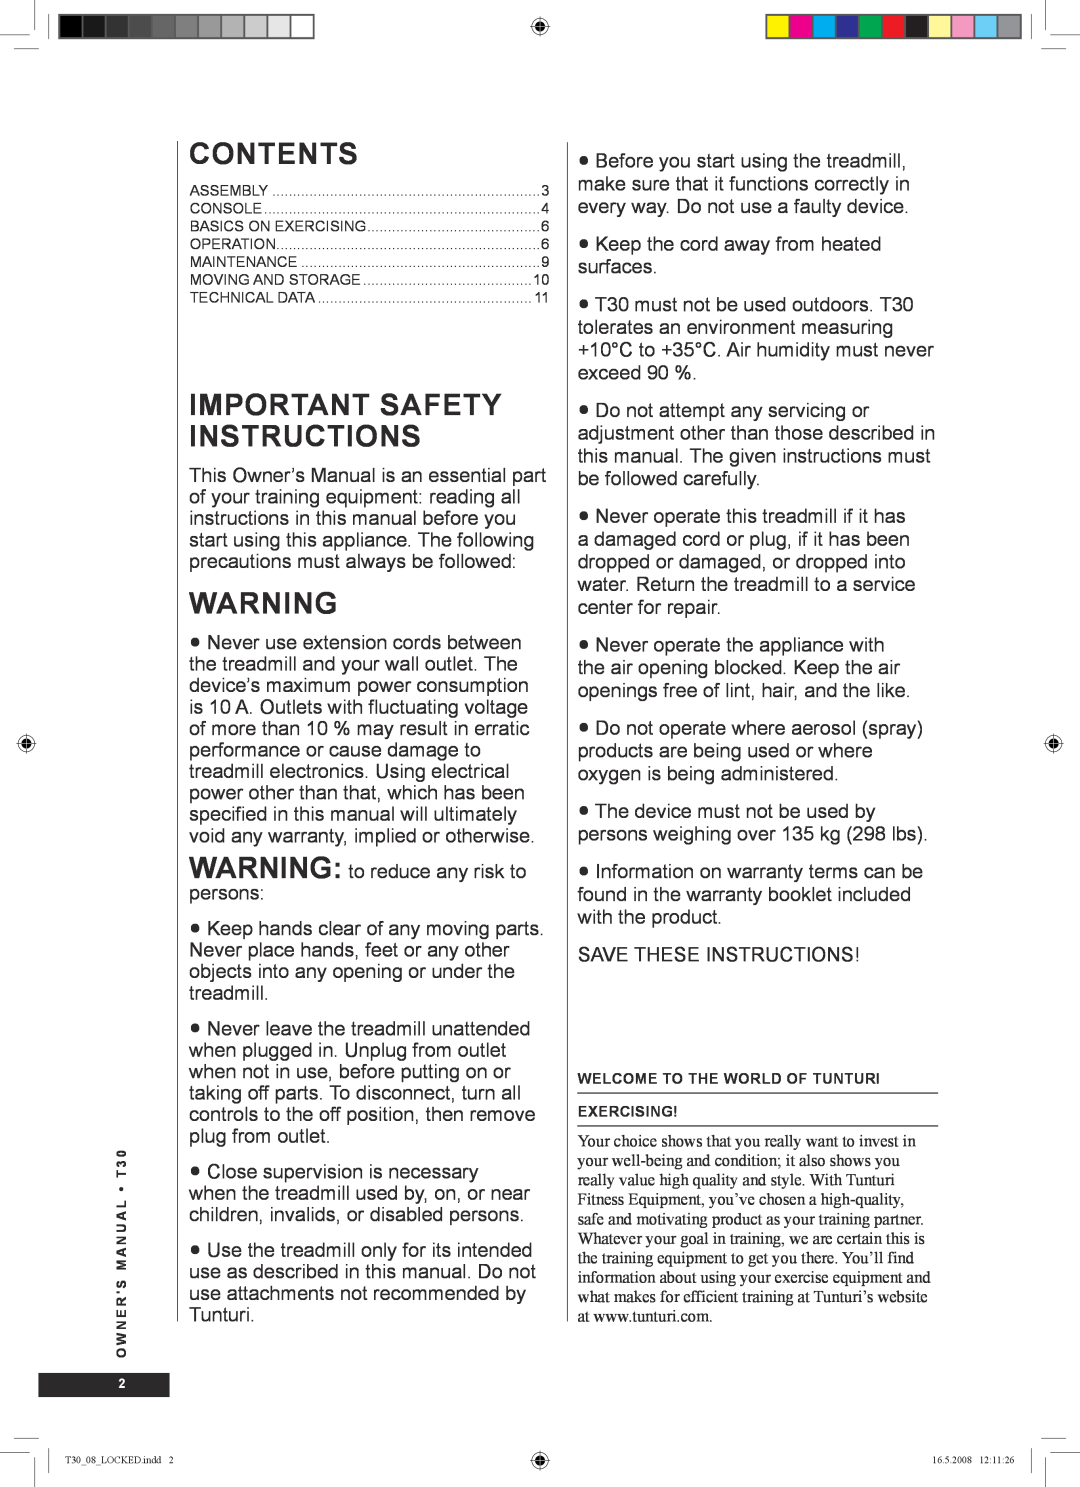 Tunturi T30 owner manual Contents, Important Safety Instructions 